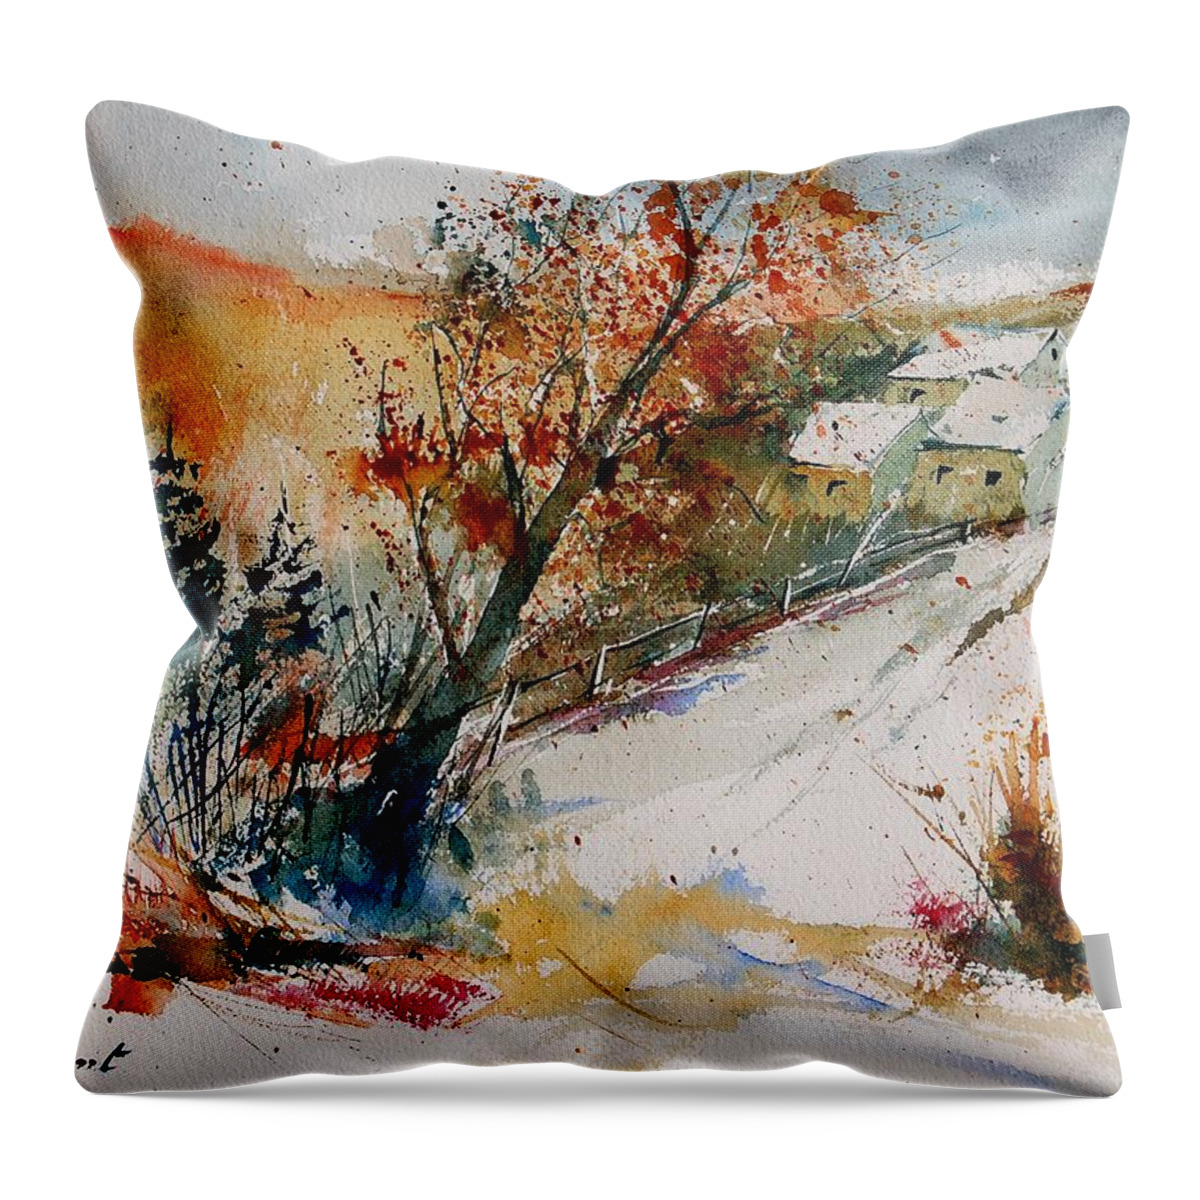 Tree Throw Pillow featuring the painting Watercolor 908002 by Pol Ledent